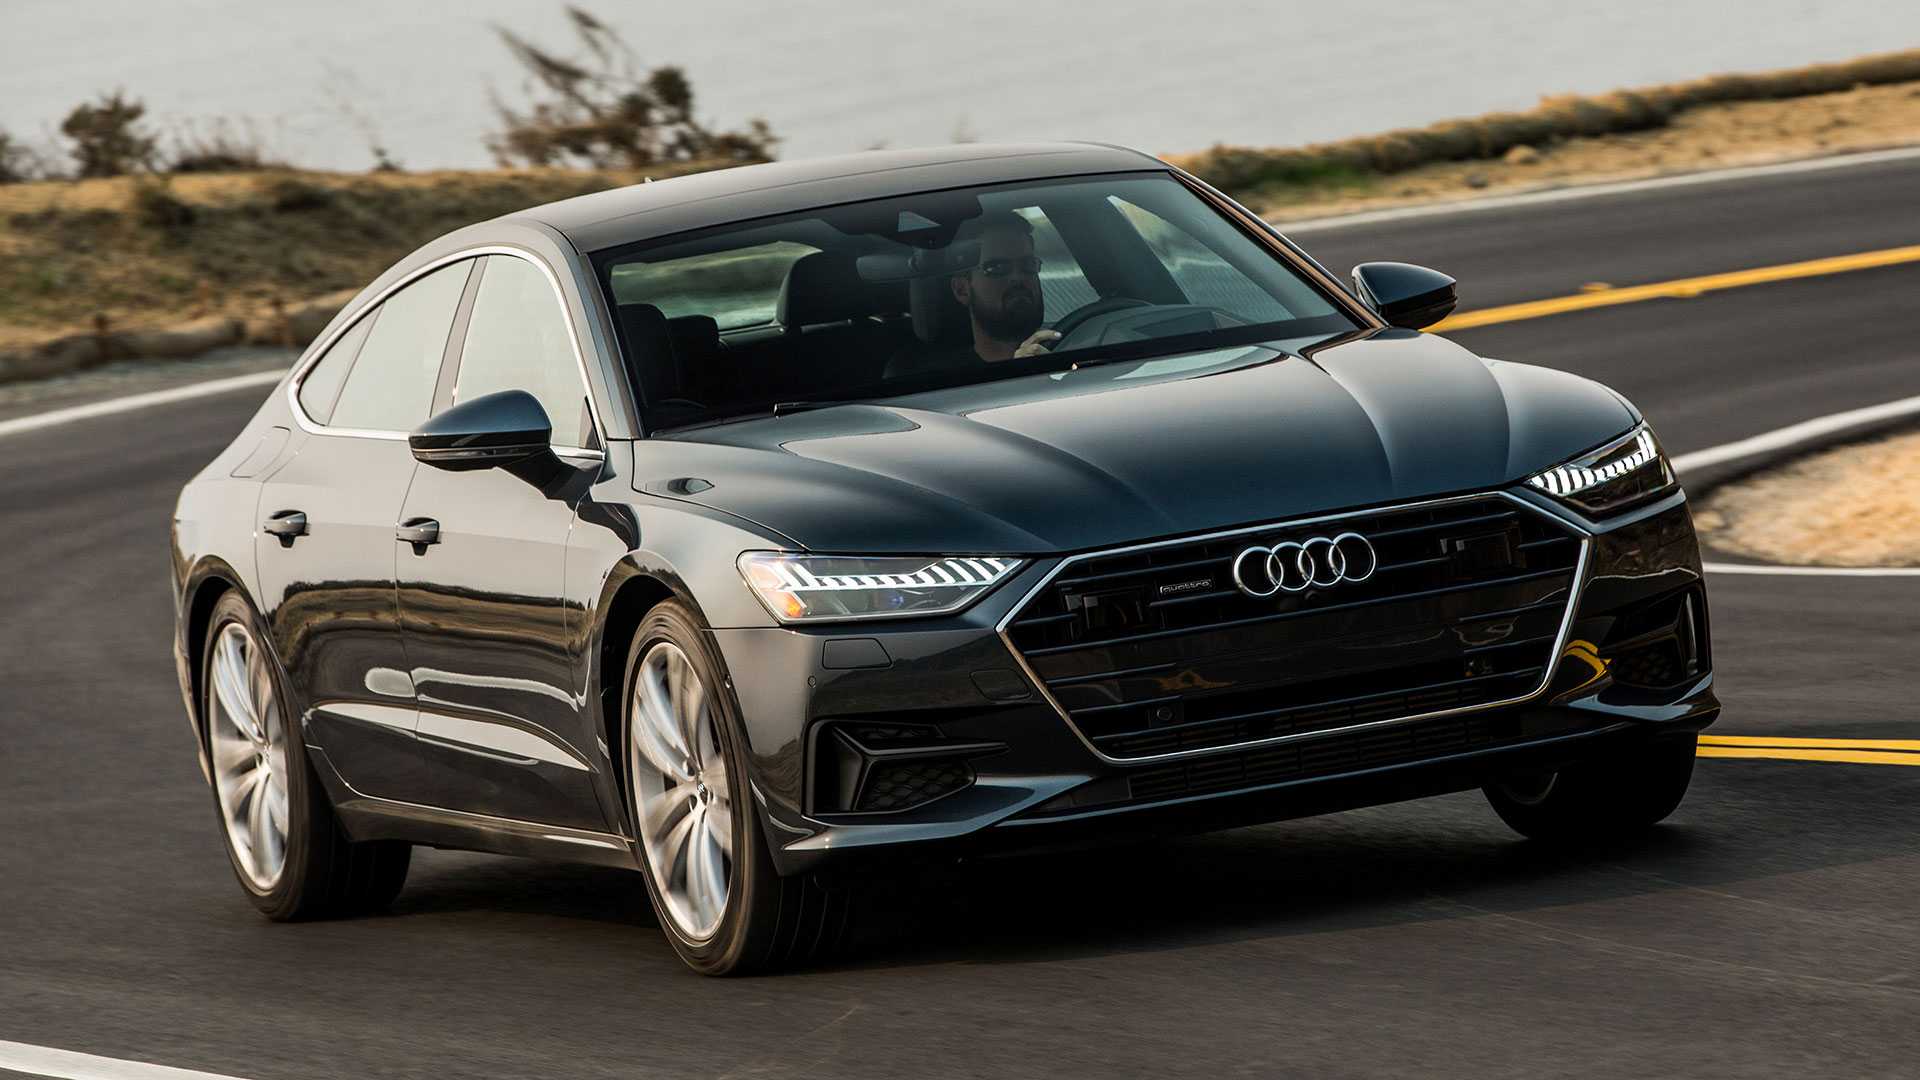 Audi A7 First Drive: Party In The Back